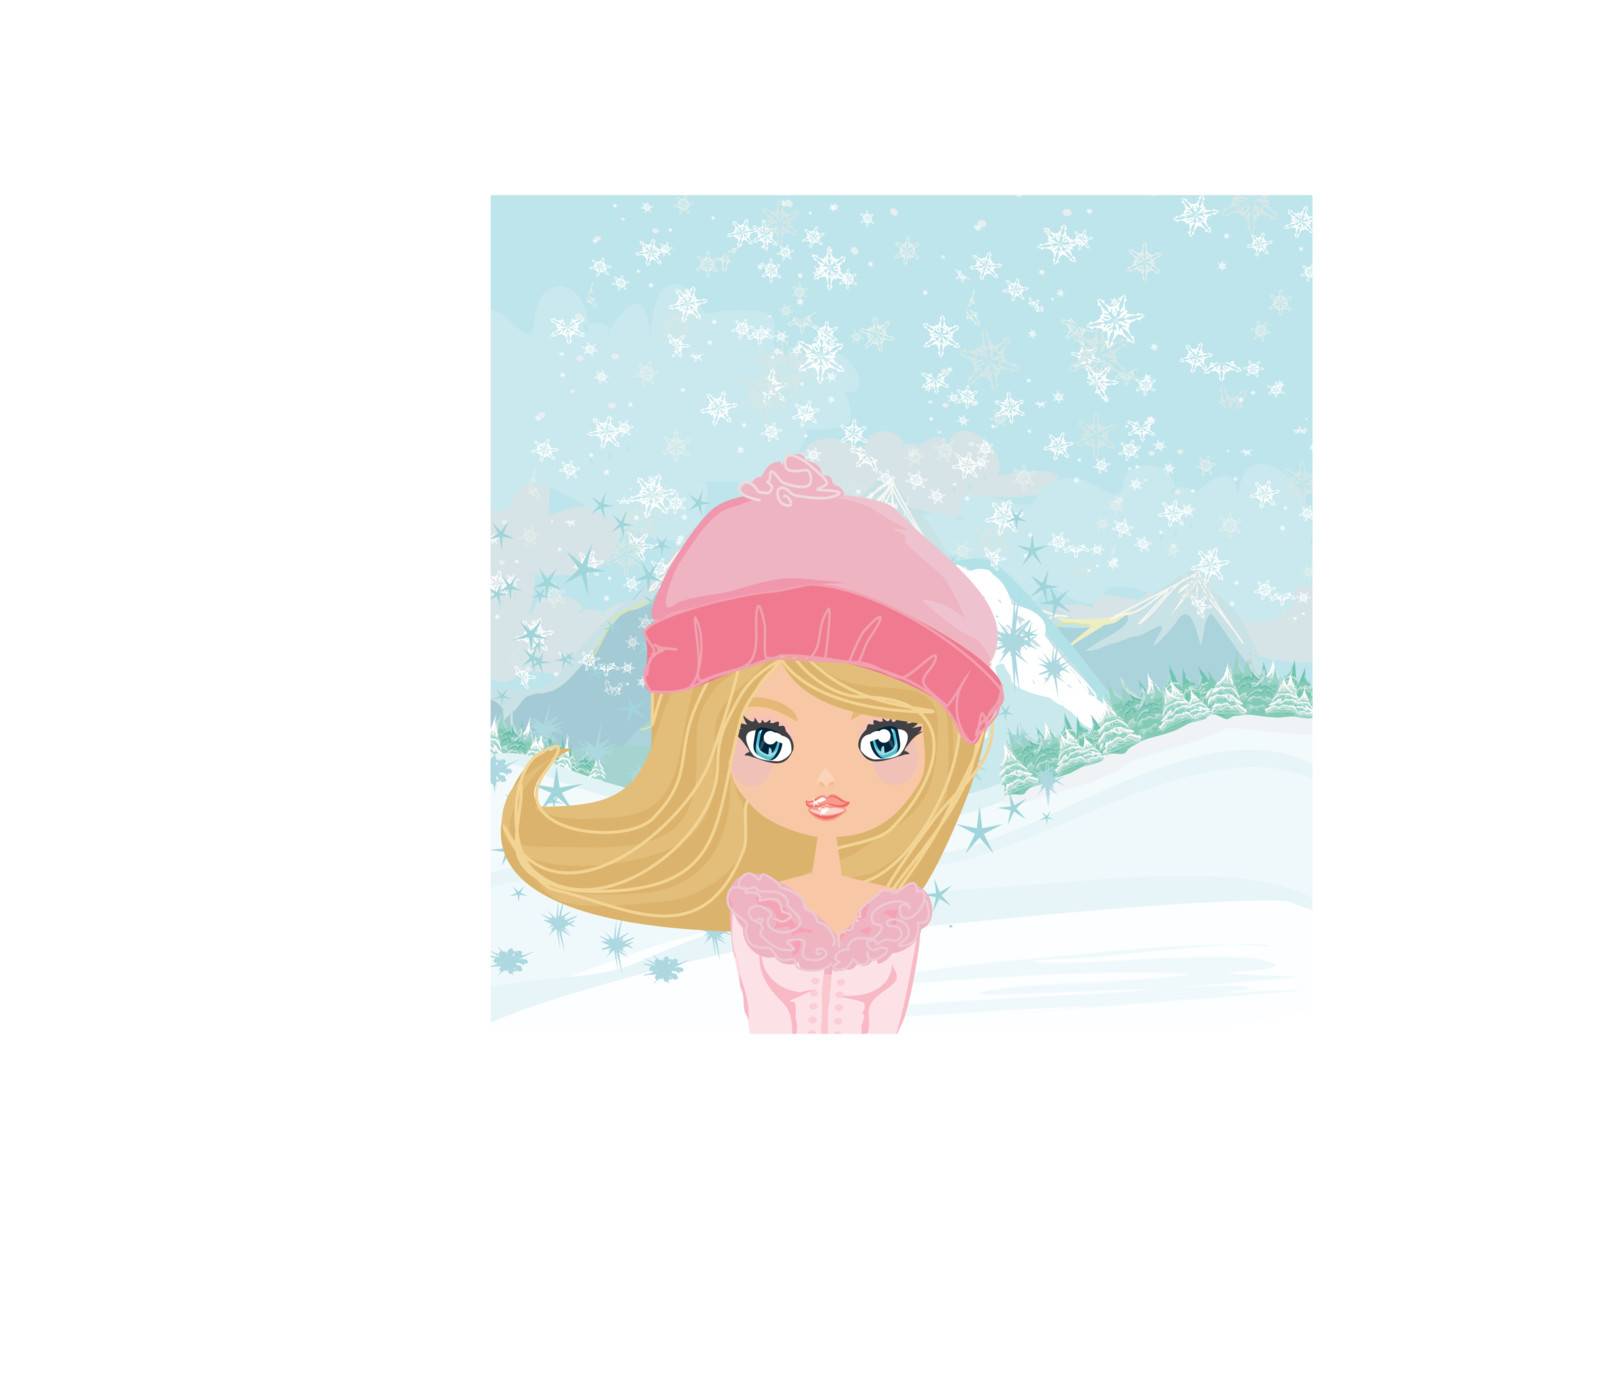 winter girl by JackyBrown